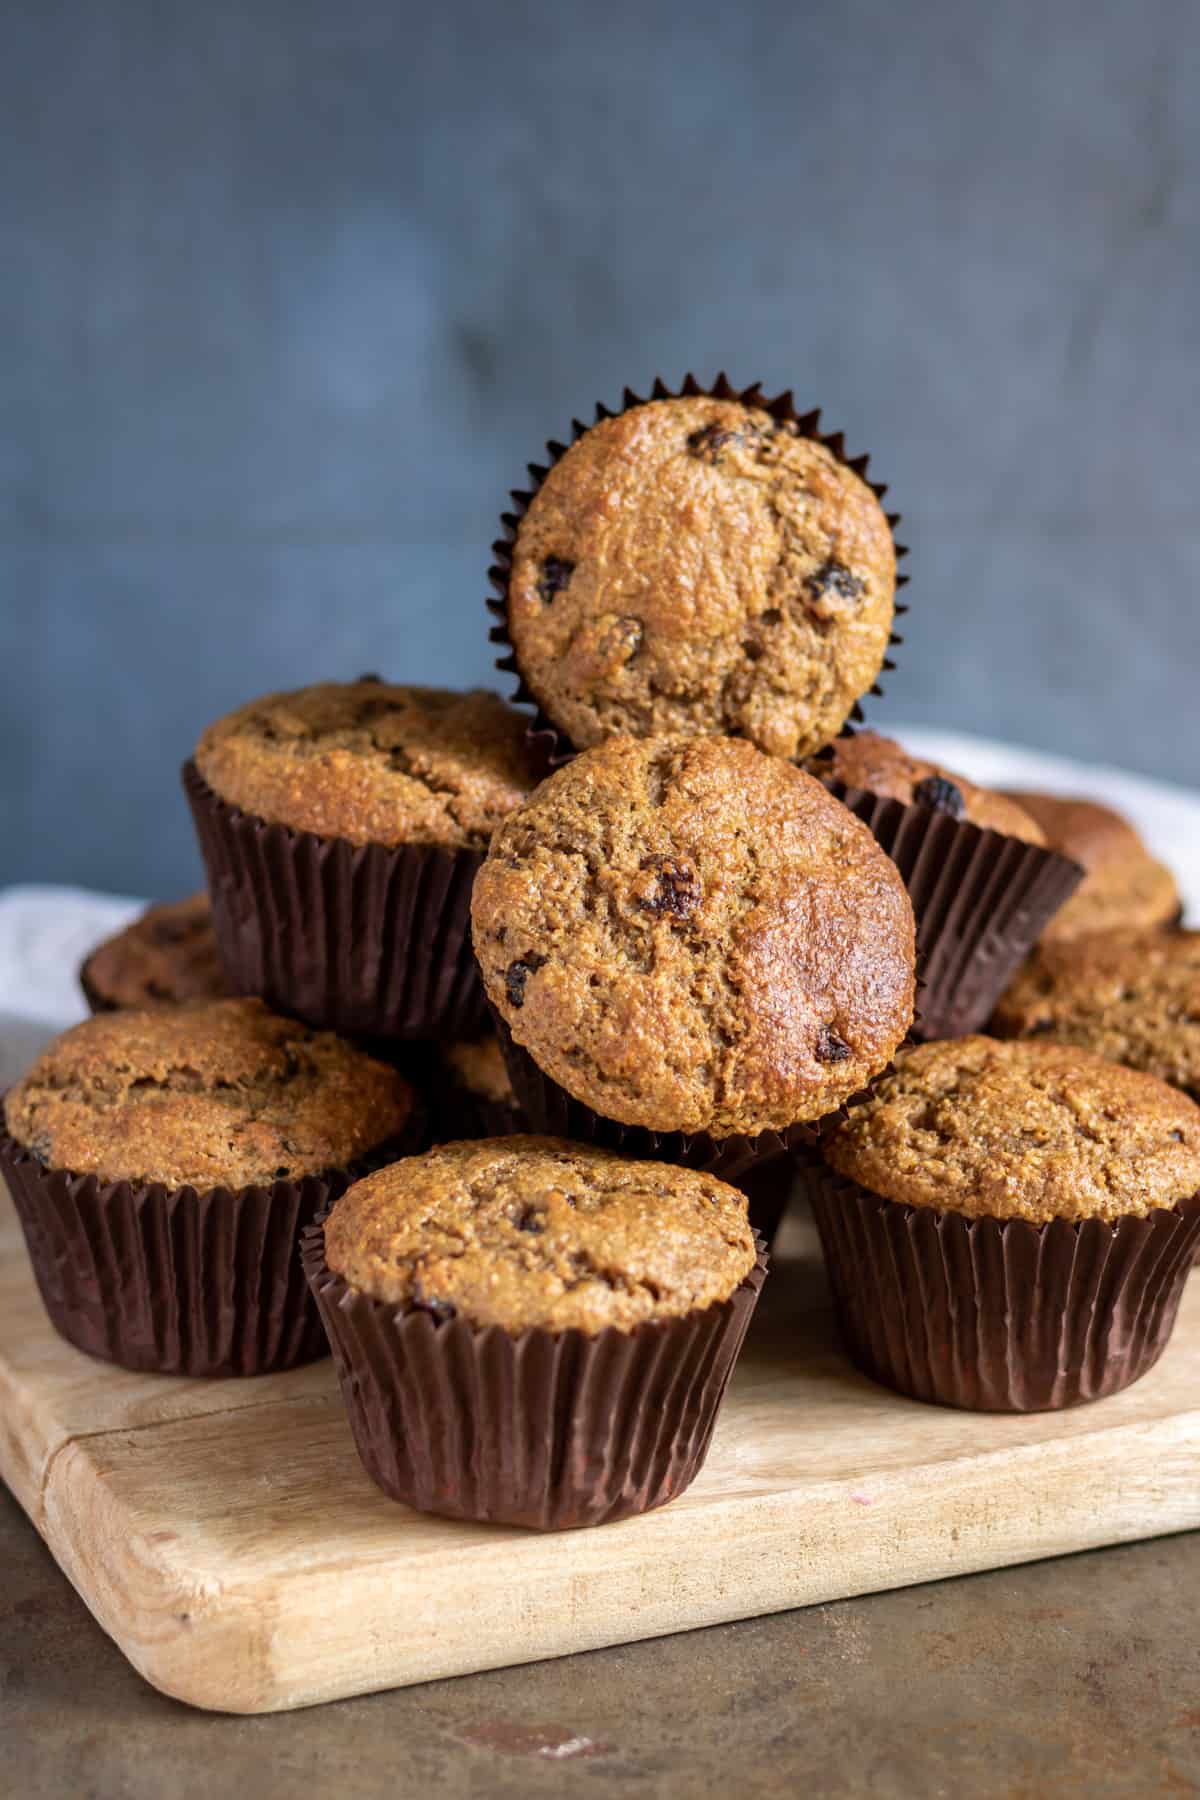 A pile of raisin bran muffins on a wooden board.